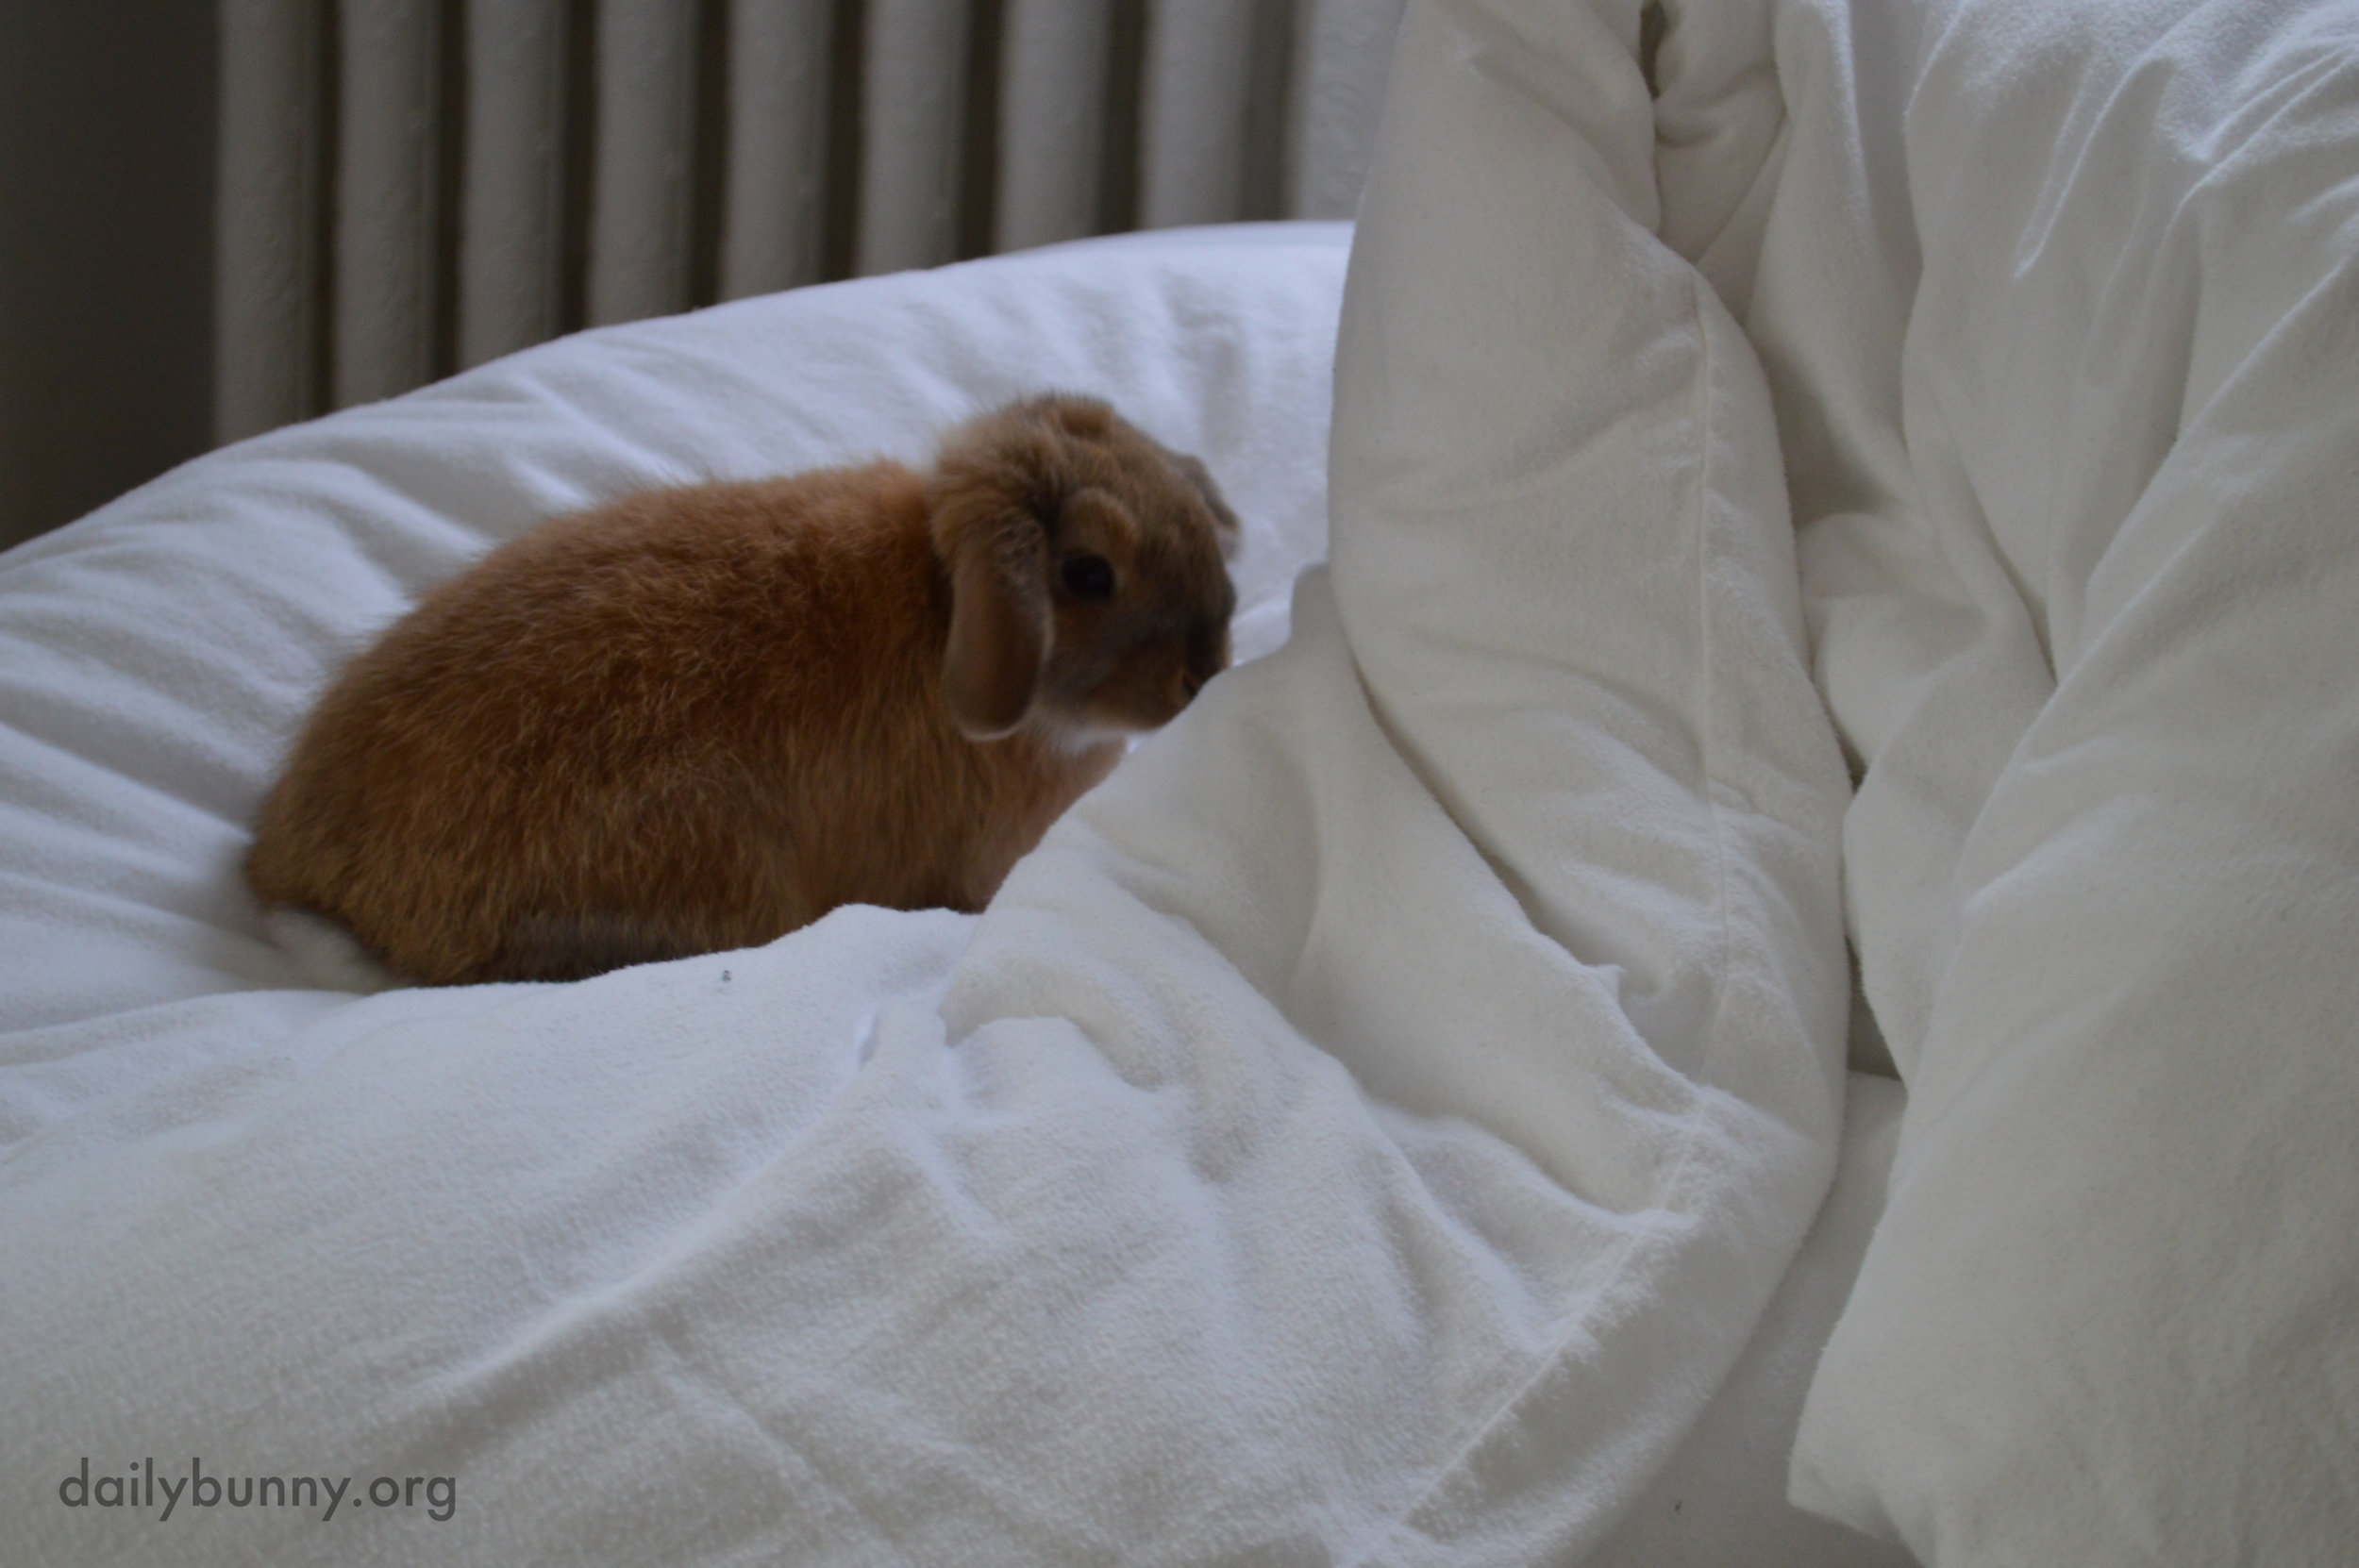 Bunny Explores the Hilly Fluffiness of the Duvet 1